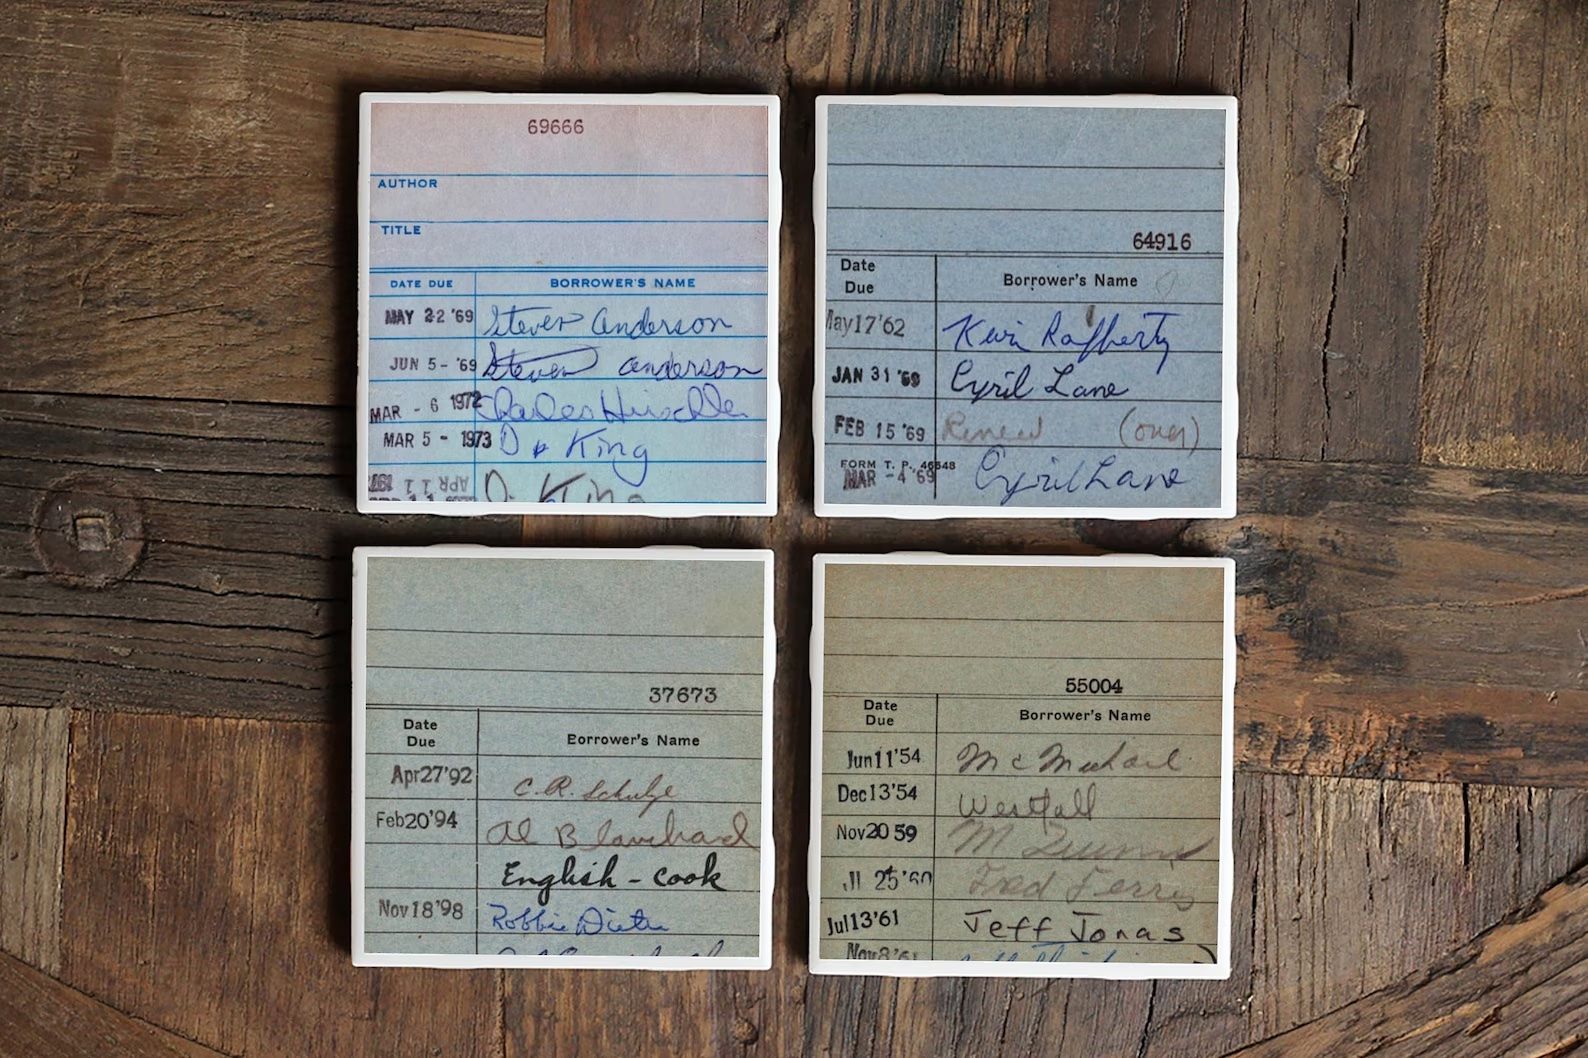 Four ceramic library due date coasters sat on a wooden table.